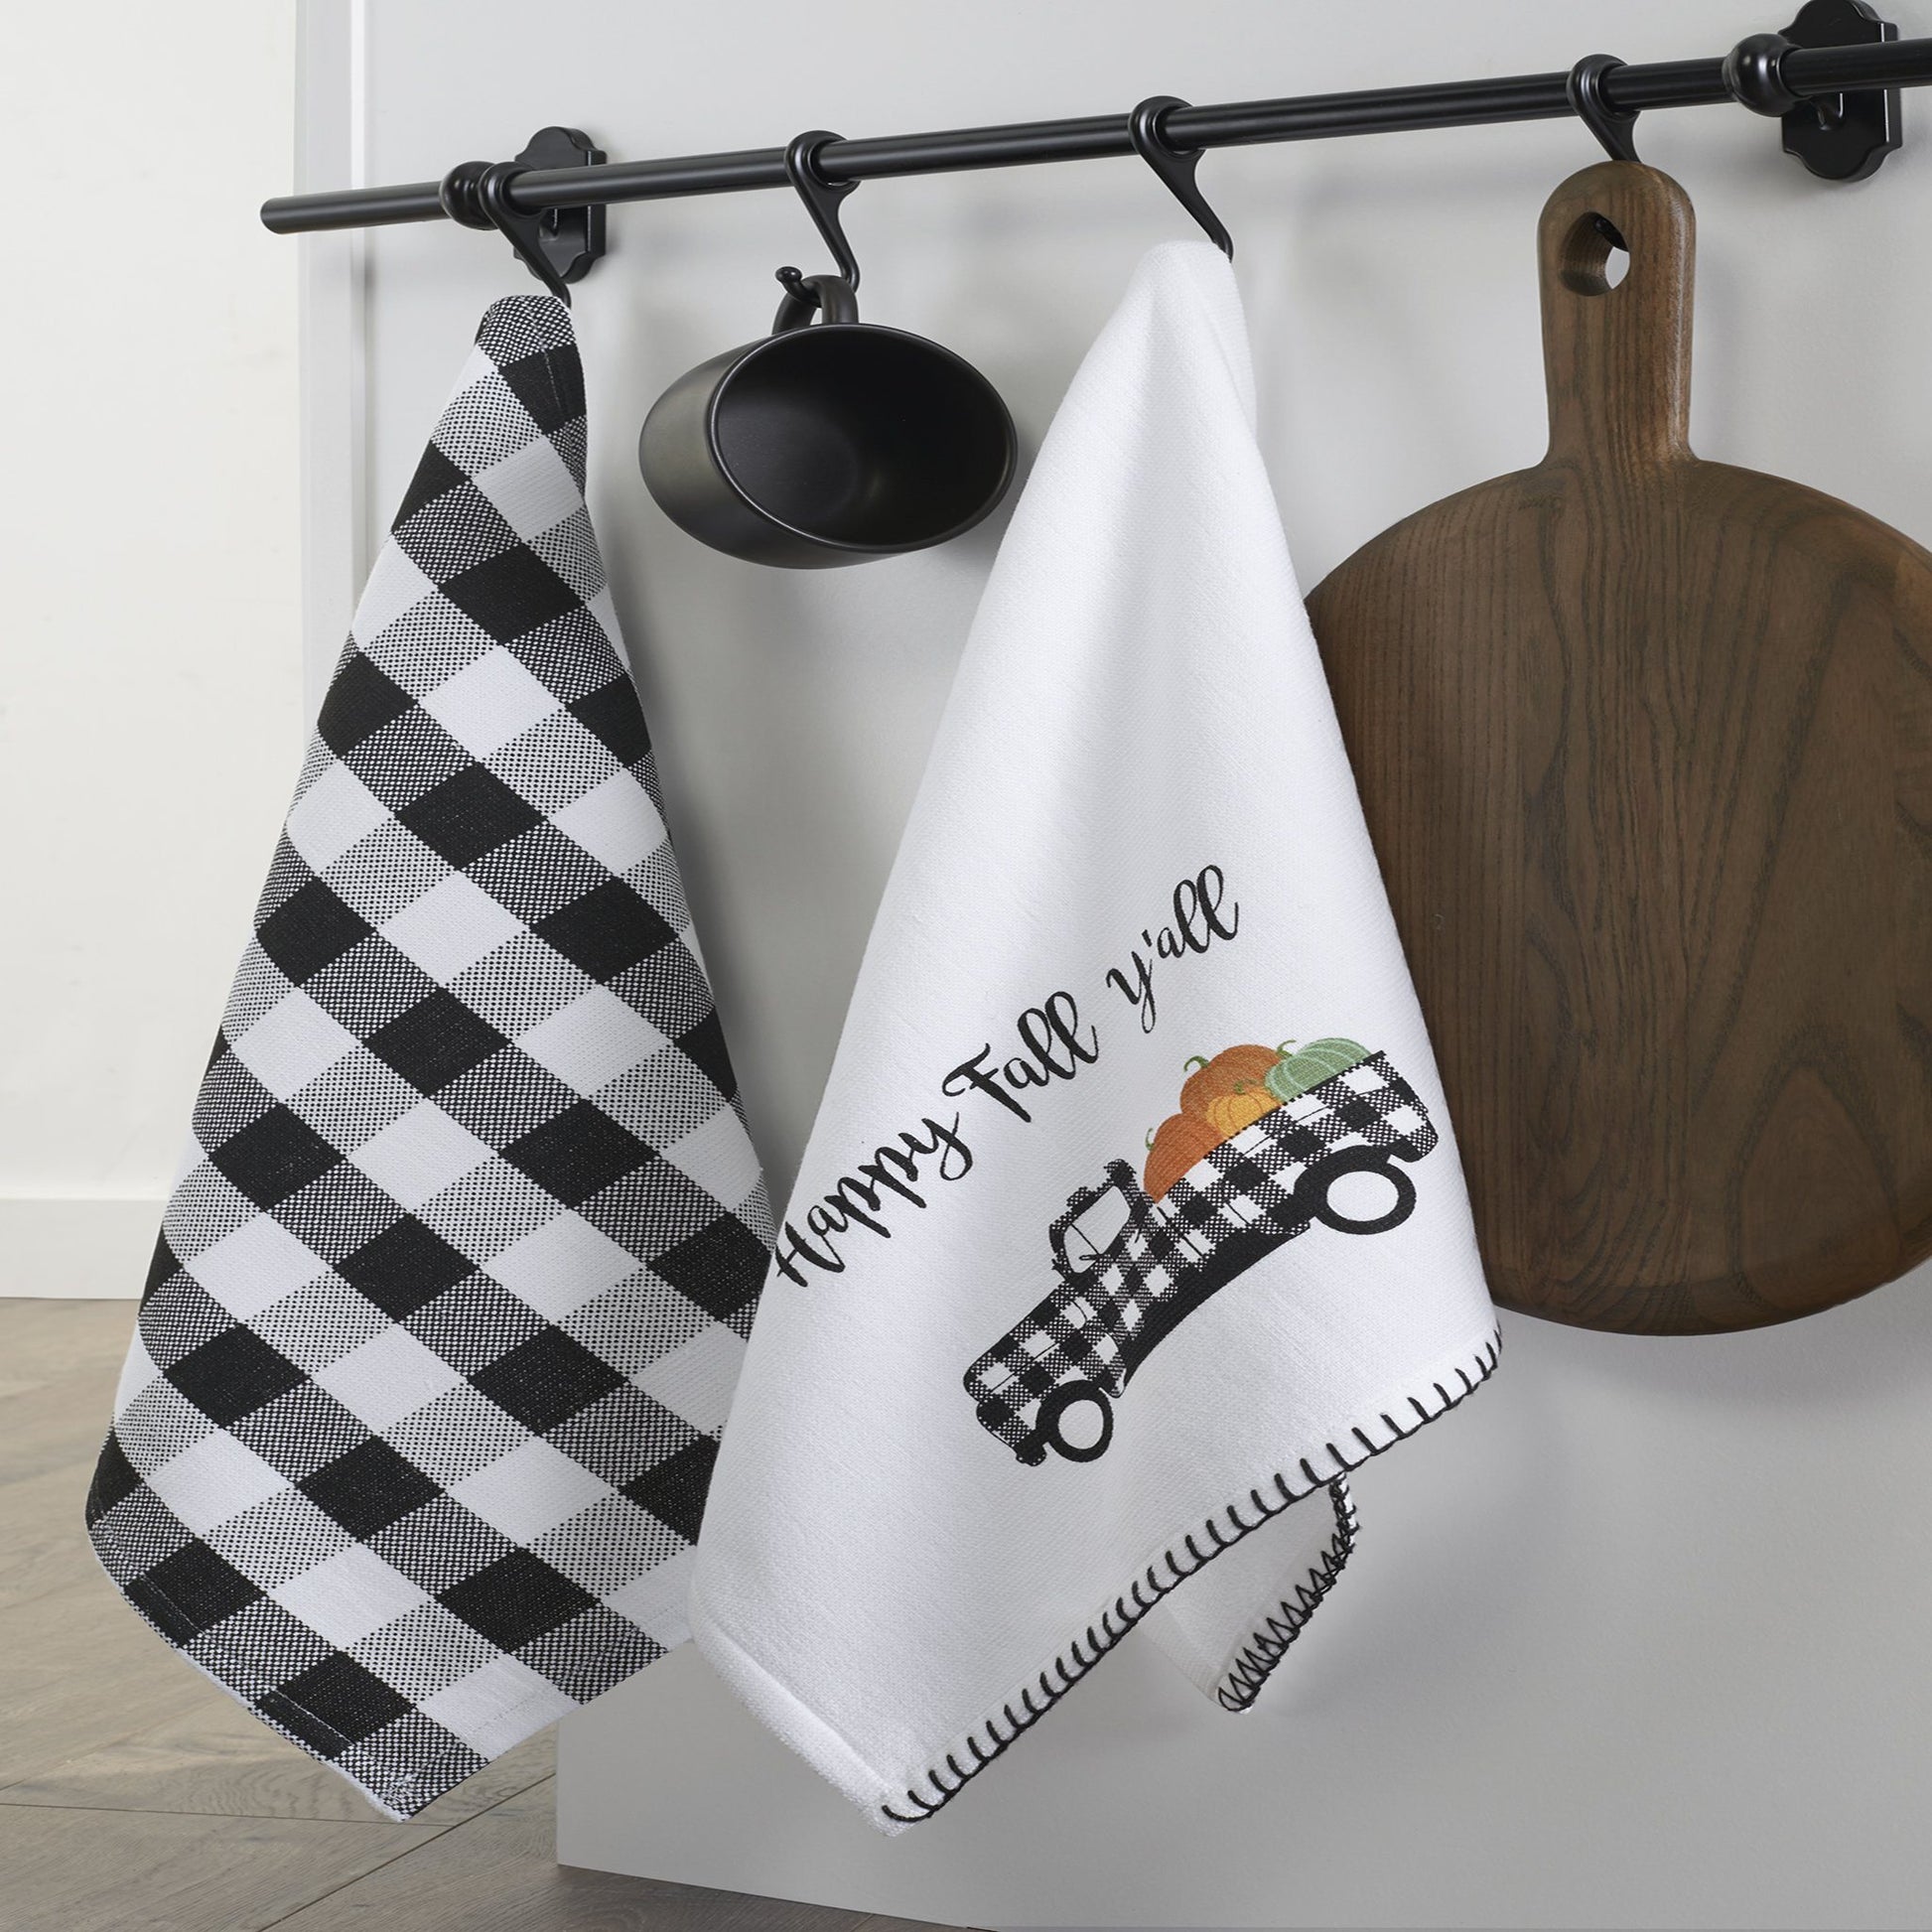 Happy Fall Y'all and Check Kitchen Towel Set